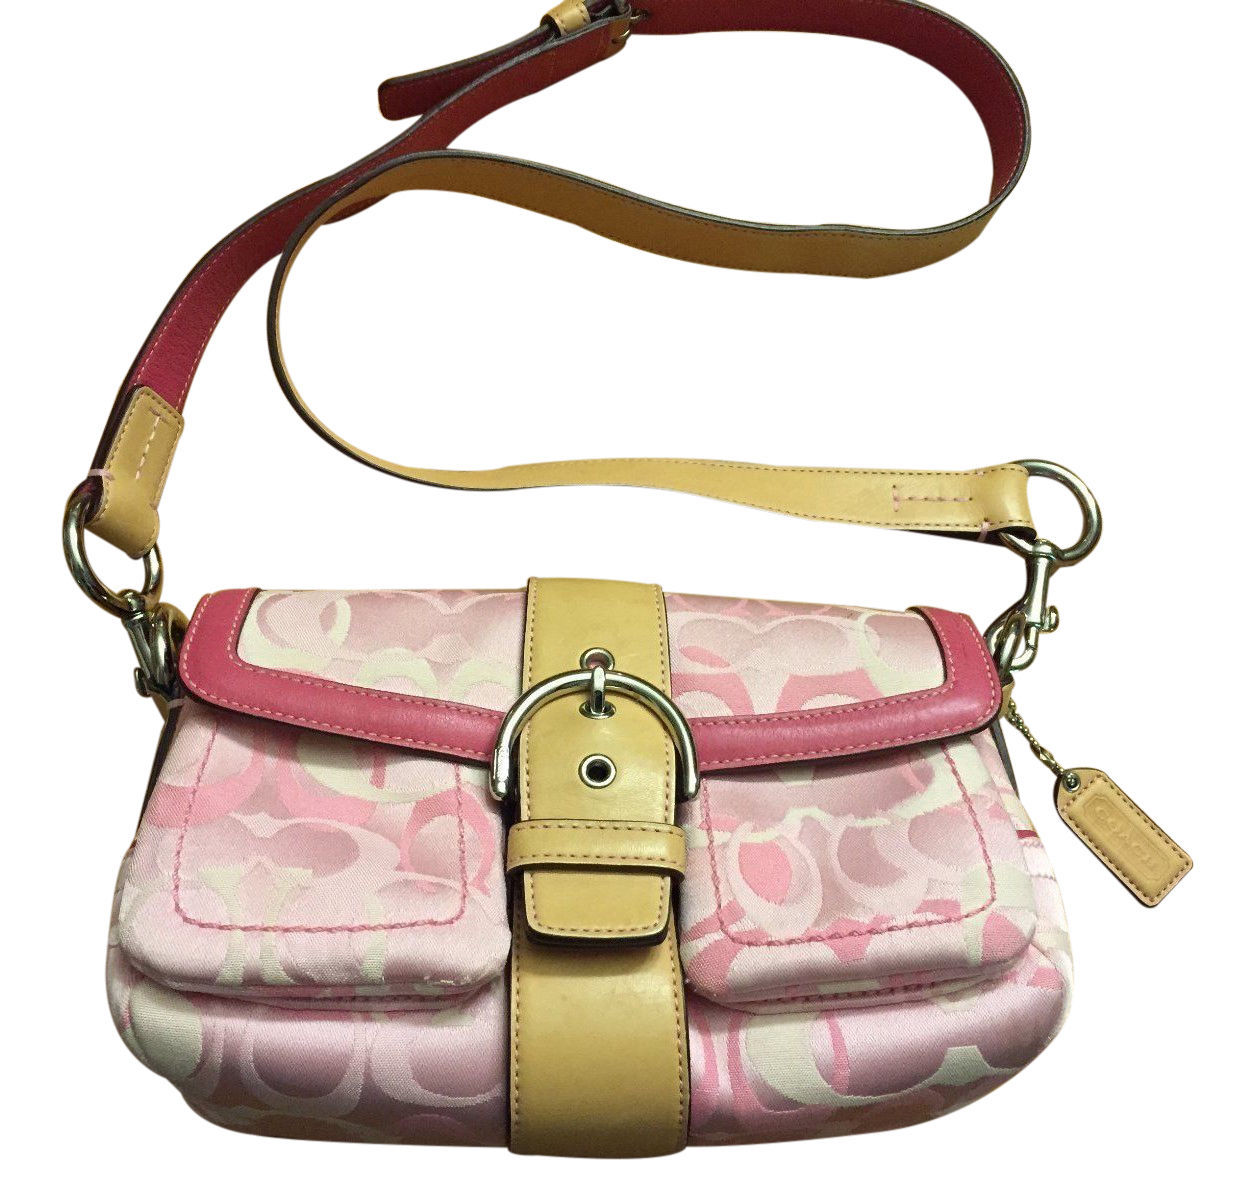 Authentic Coach Optic Pink/White Handbag, and 15 similar items